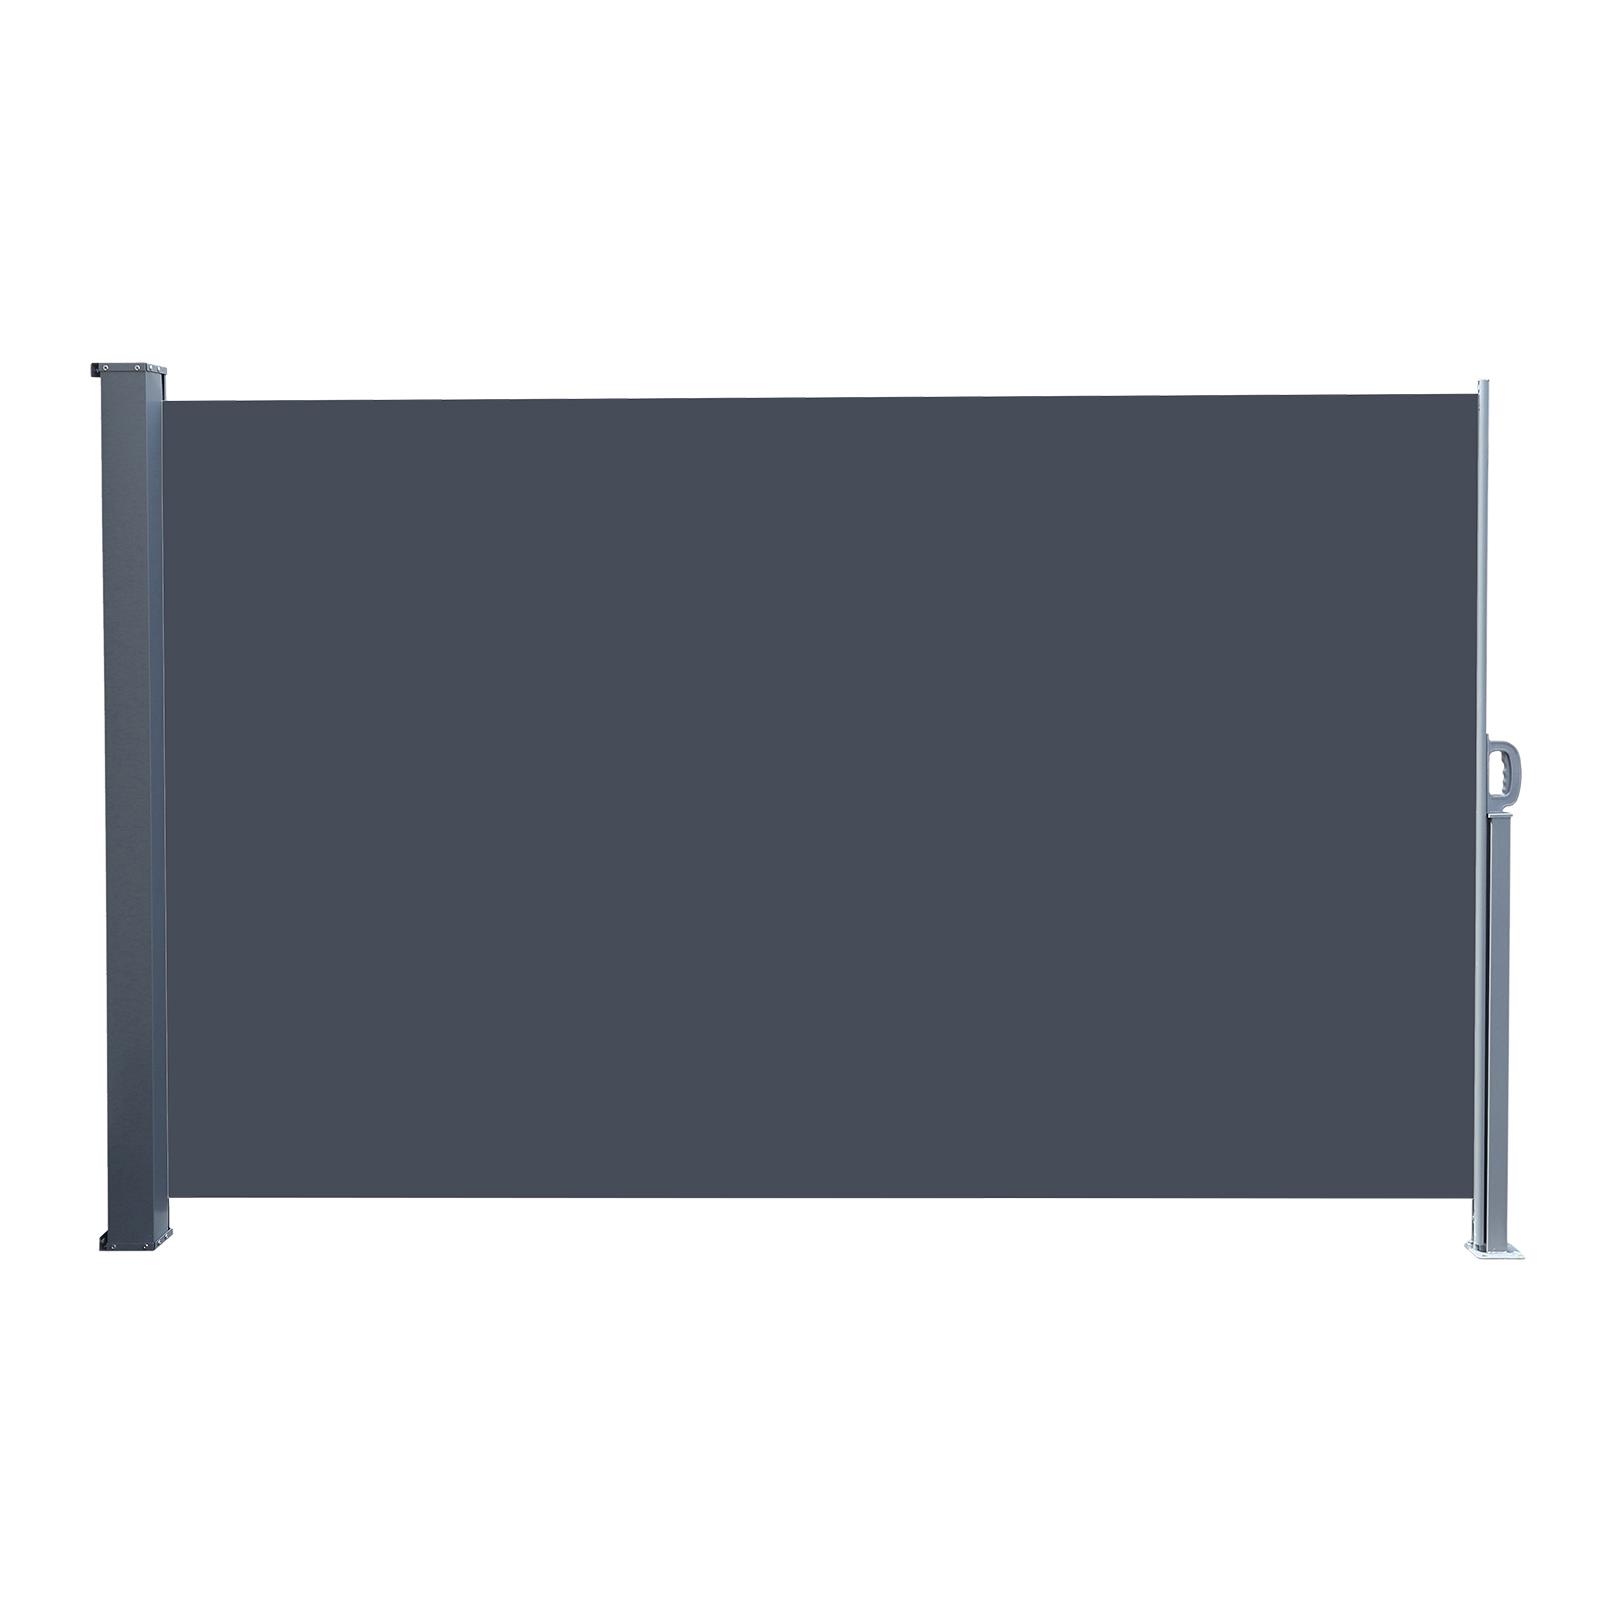 Ktaxon 71" x 118" Retractable Side Awning Wind Screen Privacy Divider-Gray - image 1 of 5